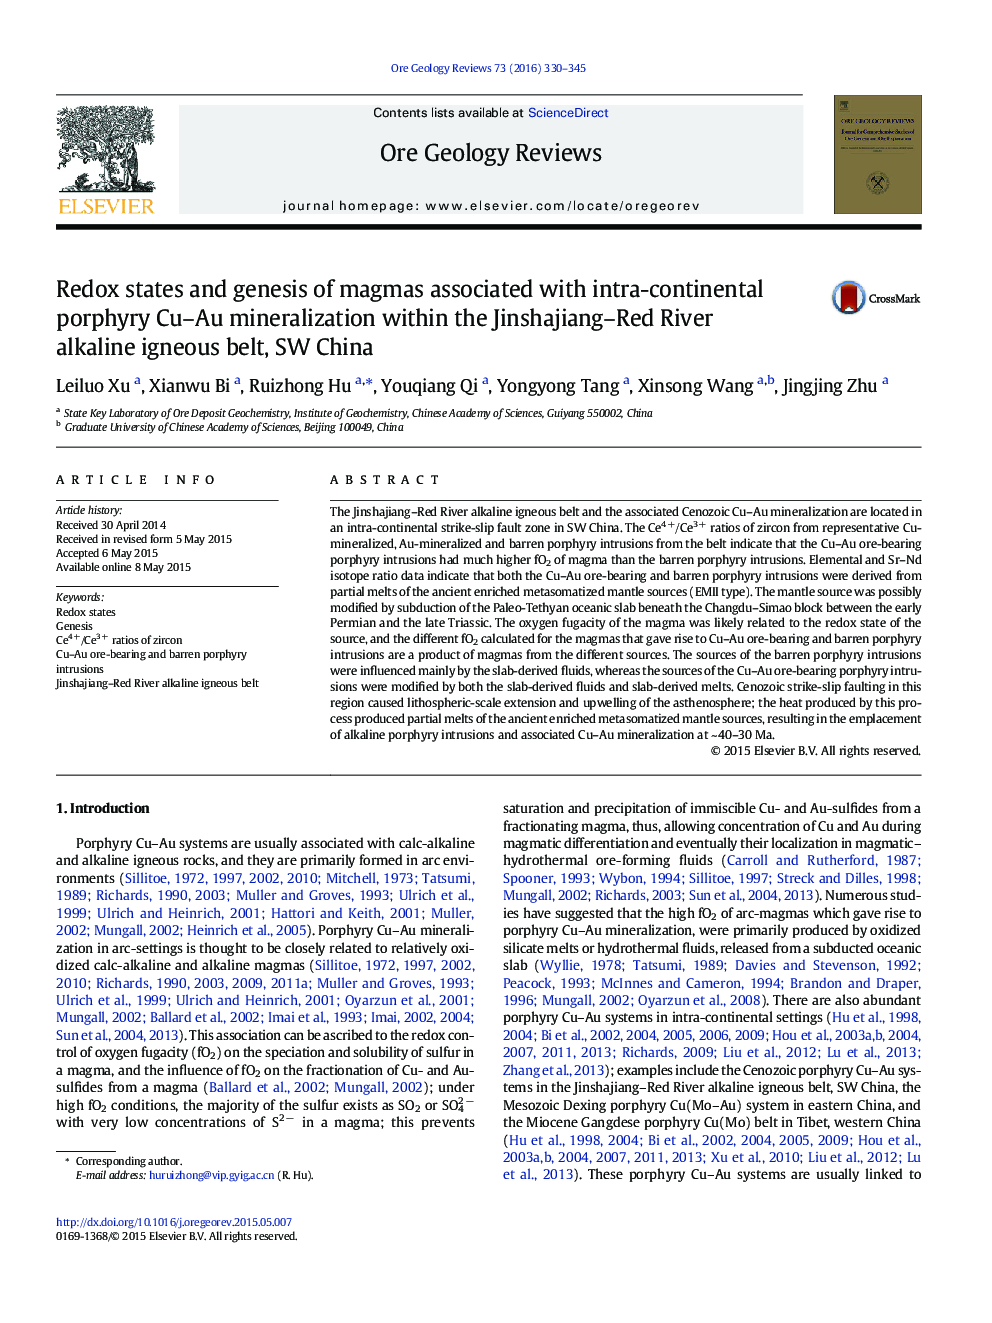 Redox states and genesis of magmas associated with intra-continental porphyry Cu–Au mineralization within the Jinshajiang–Red River alkaline igneous belt, SW China